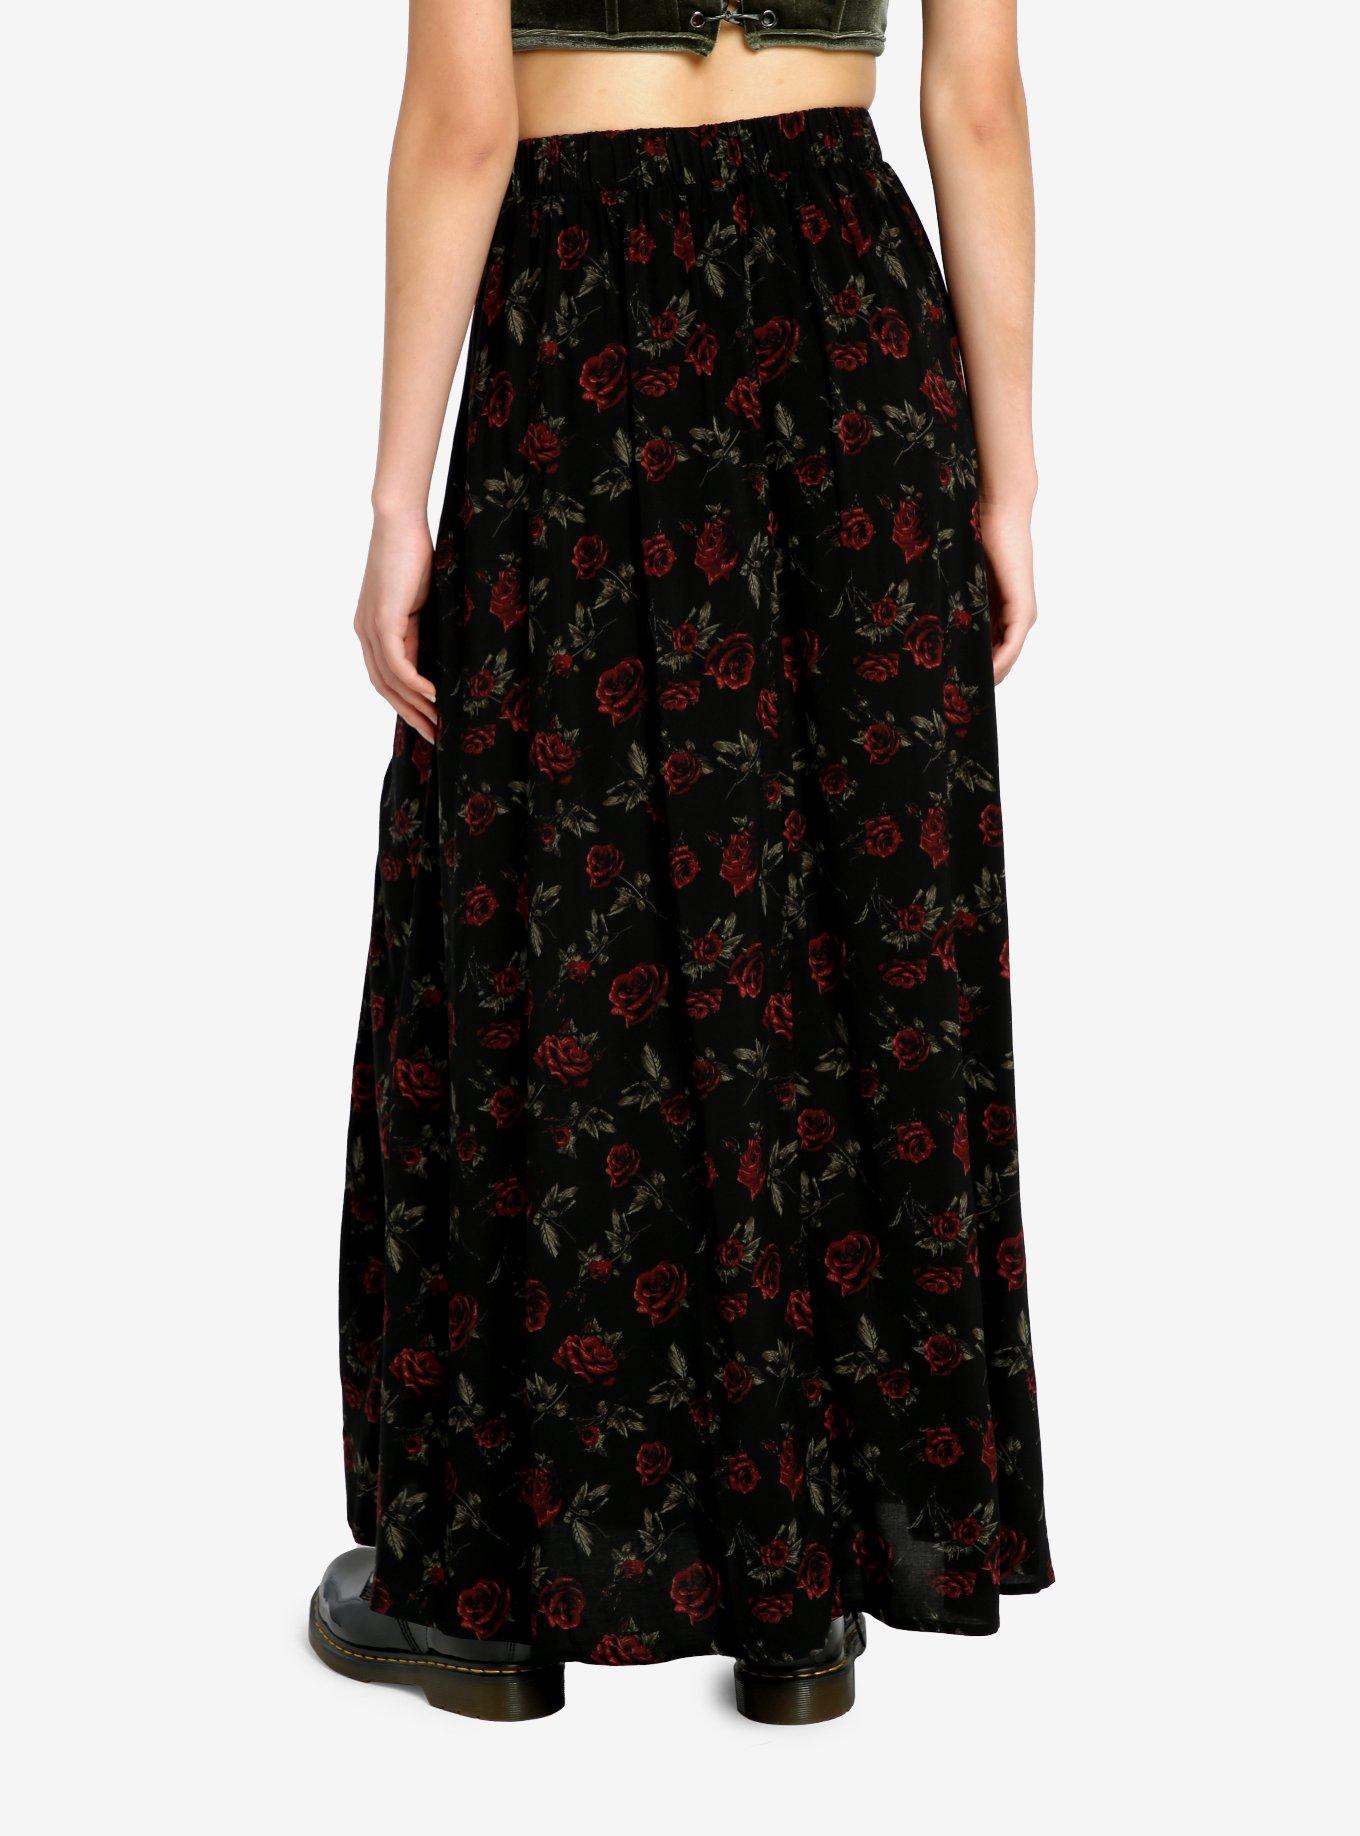 Thorn & Fable Dark Red Rose Lace-Up Maxi Skirt, RED, alternate